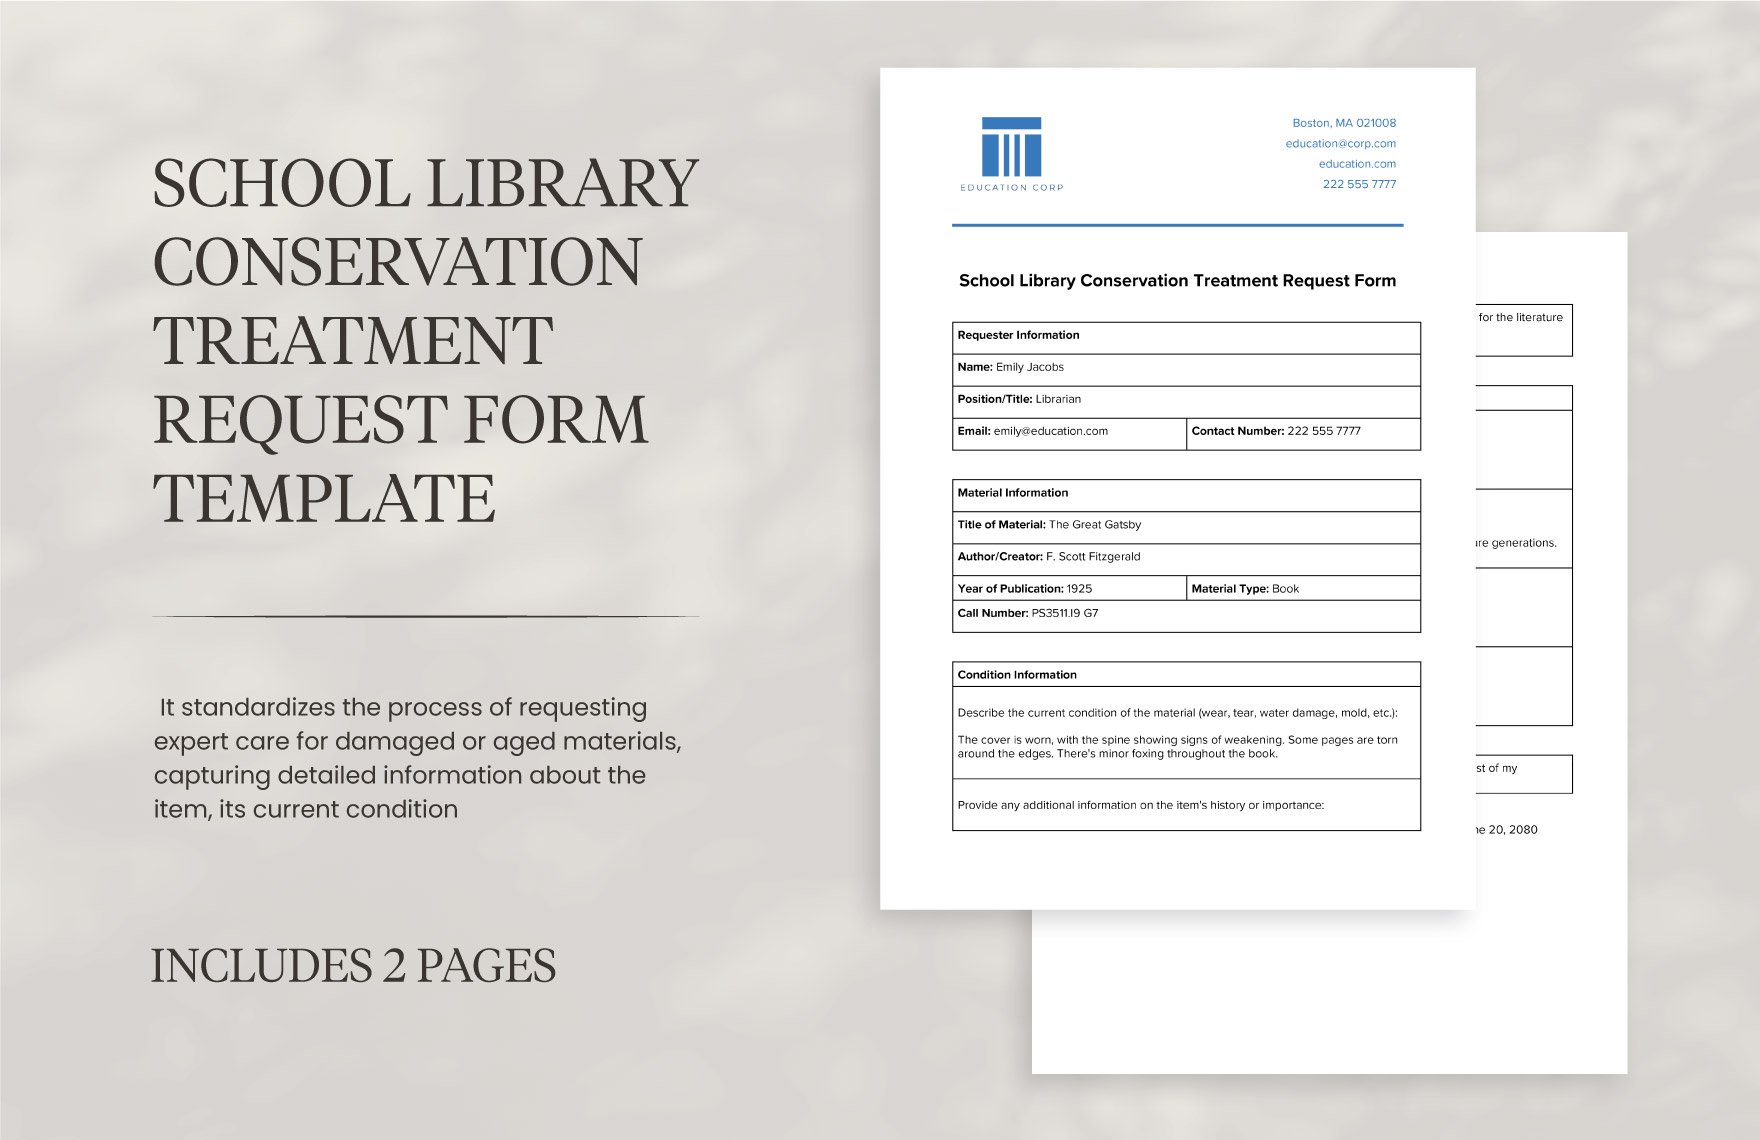 School Library Conservation Treatment Request Form Template